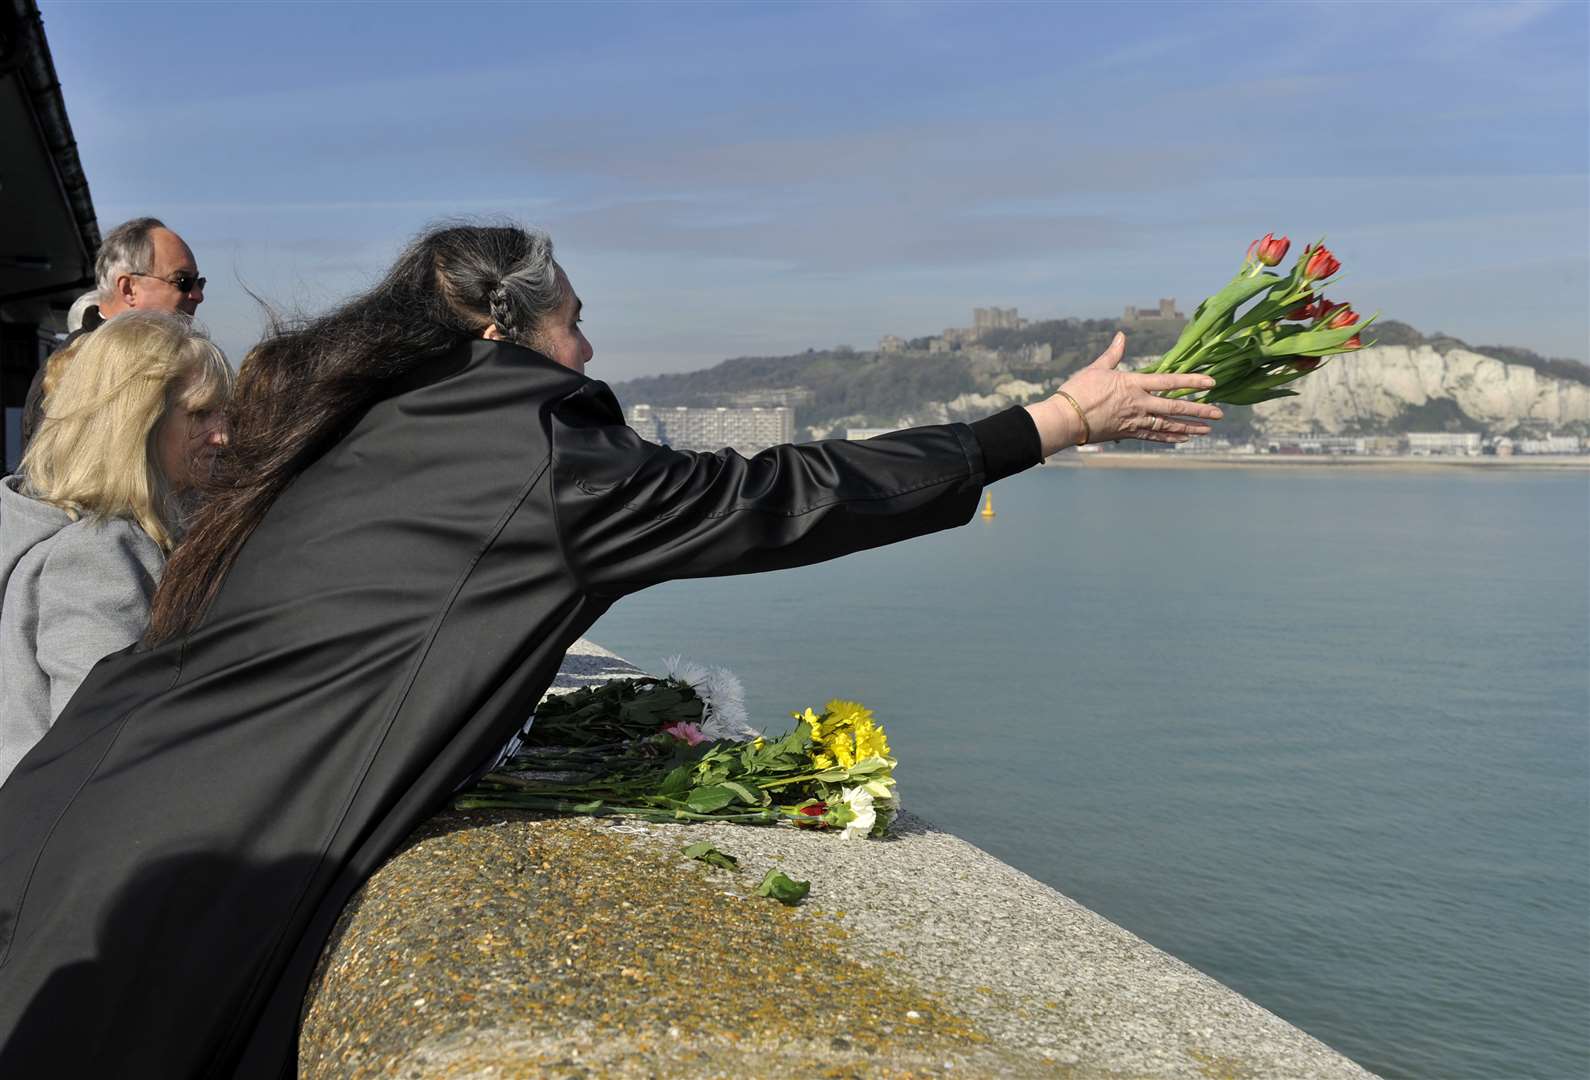 Some people will go to the Prince of Wales pier and throw wreaths and flowers into the sea to mark its anniversary.